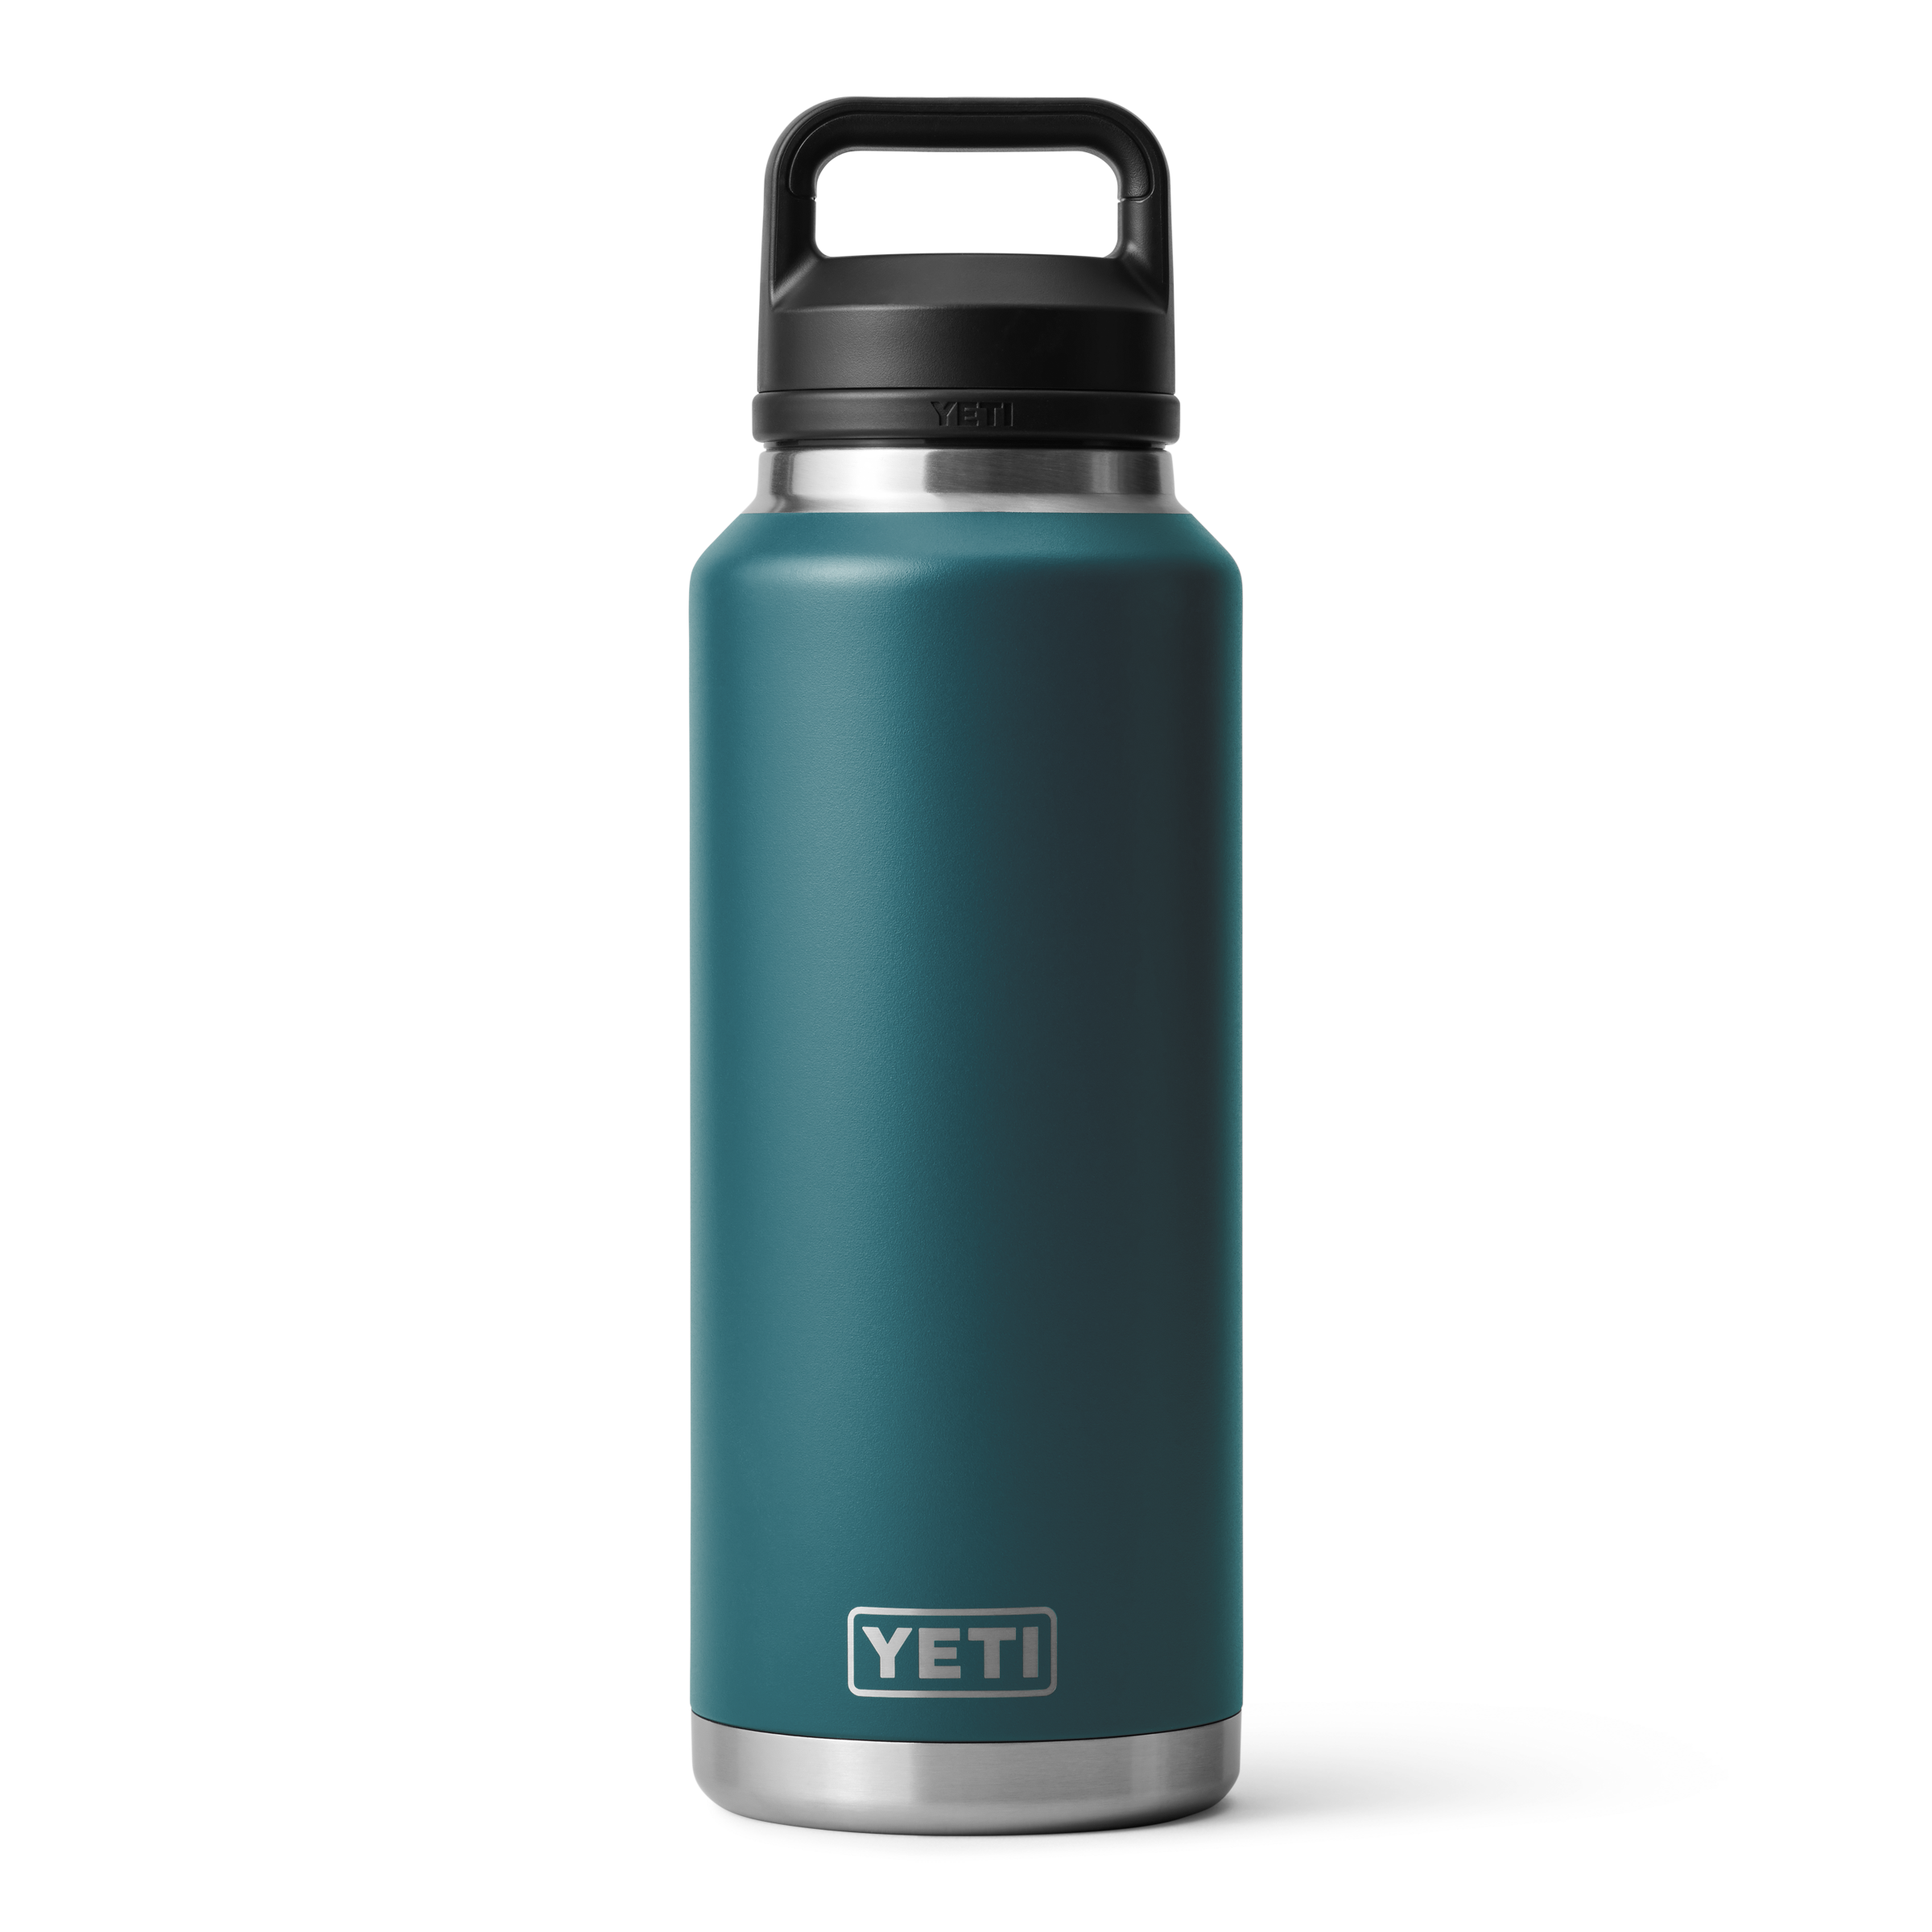 Yeti 46oz Bottle With Chug Cap - 46OZ / AGAVE TEAL - Mansfield Hunting & Fishing - Products to prepare for Corona Virus